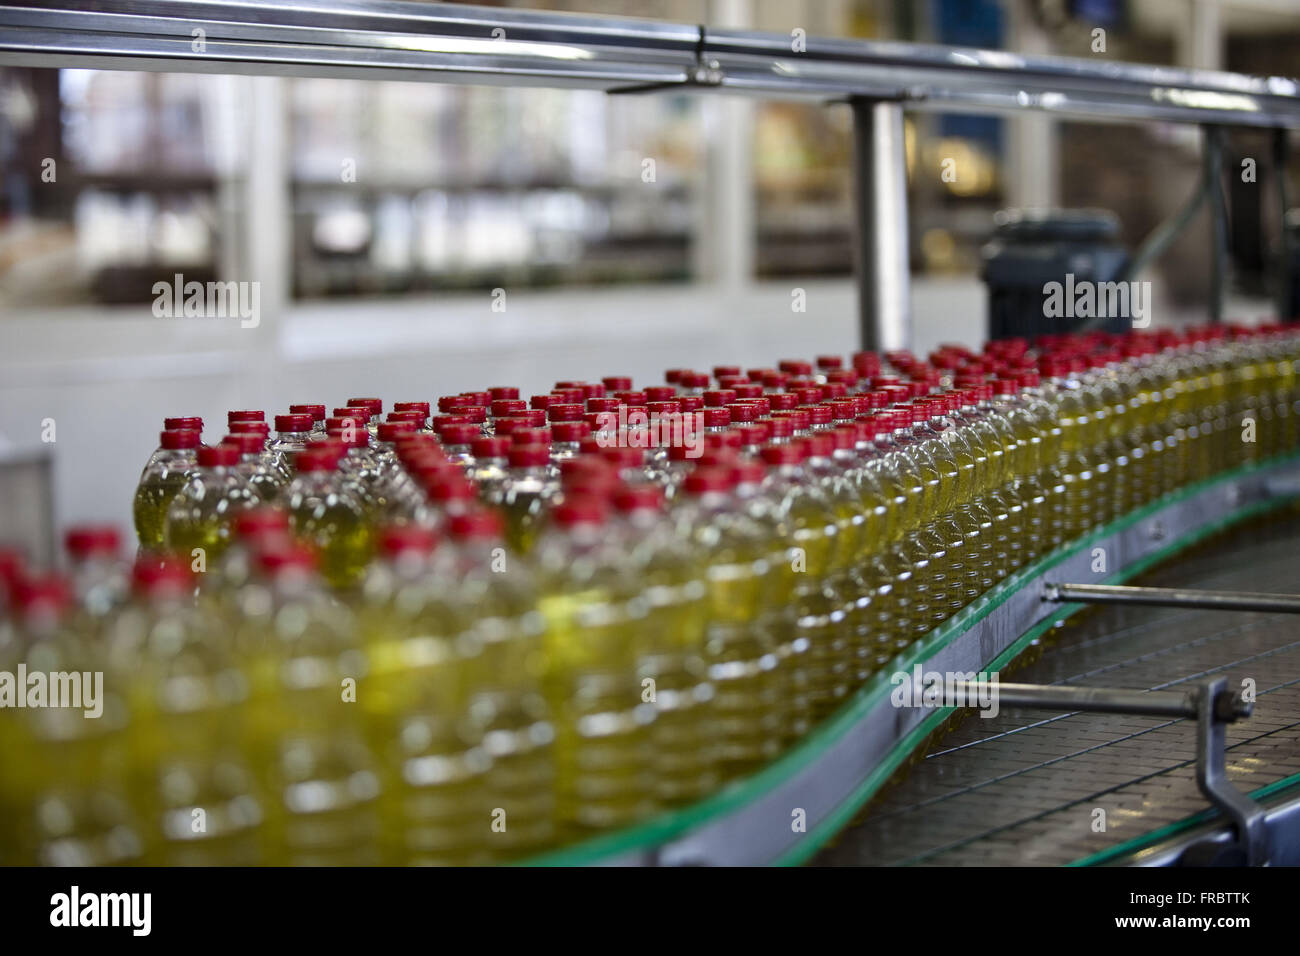 Bottled soybean oil packaged in cooperative Stock Photo